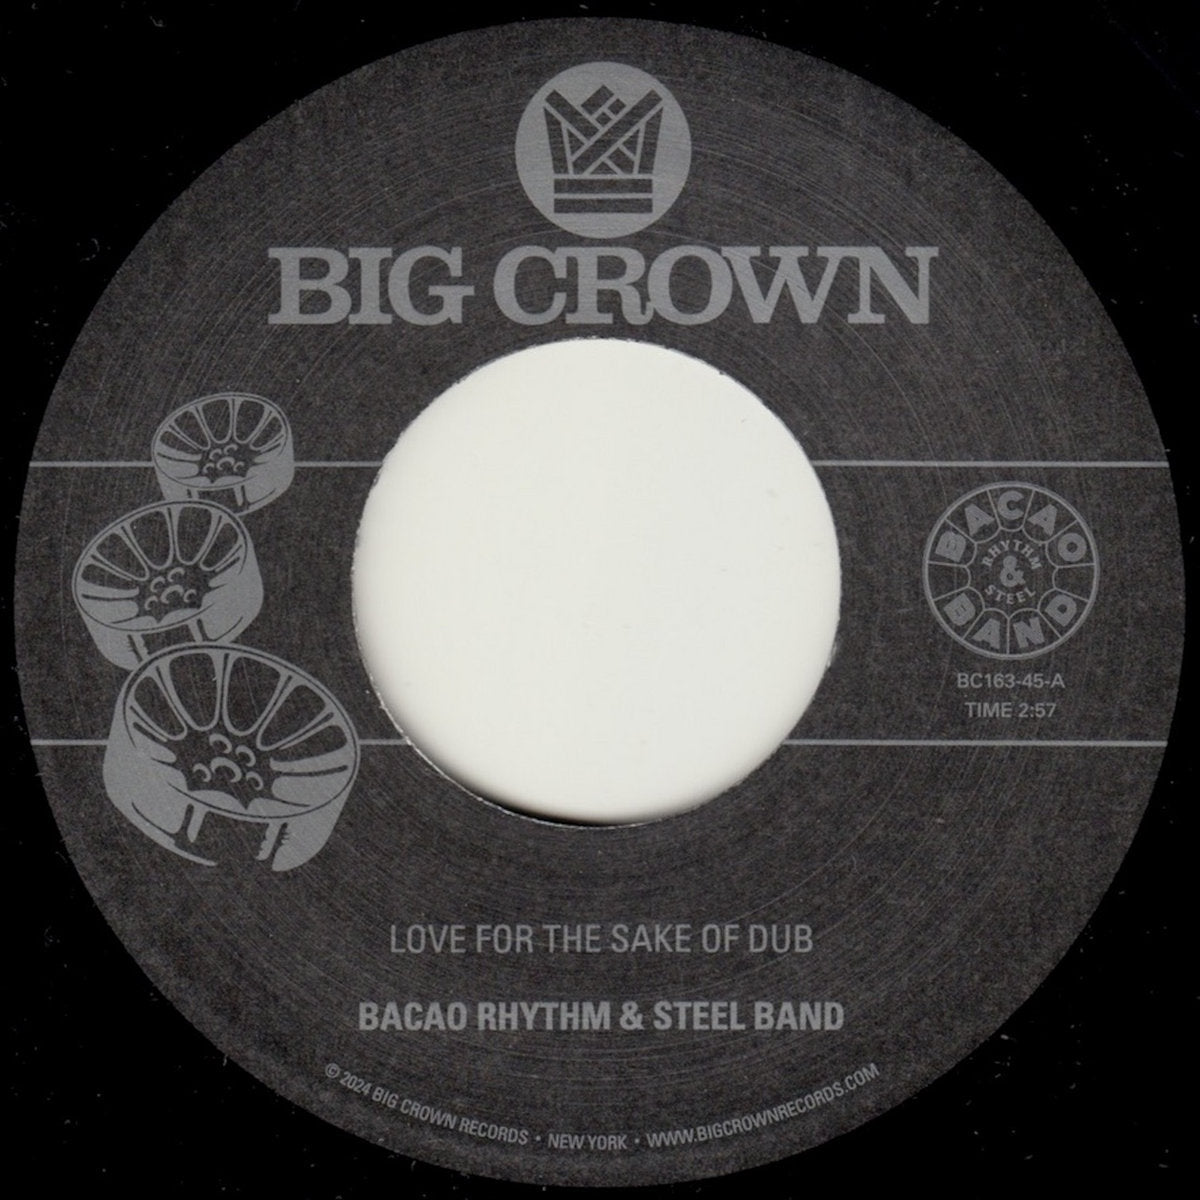 【7"】Bacao Rhythm & Steel Band - Love For The Sake Of Dub / Grilled